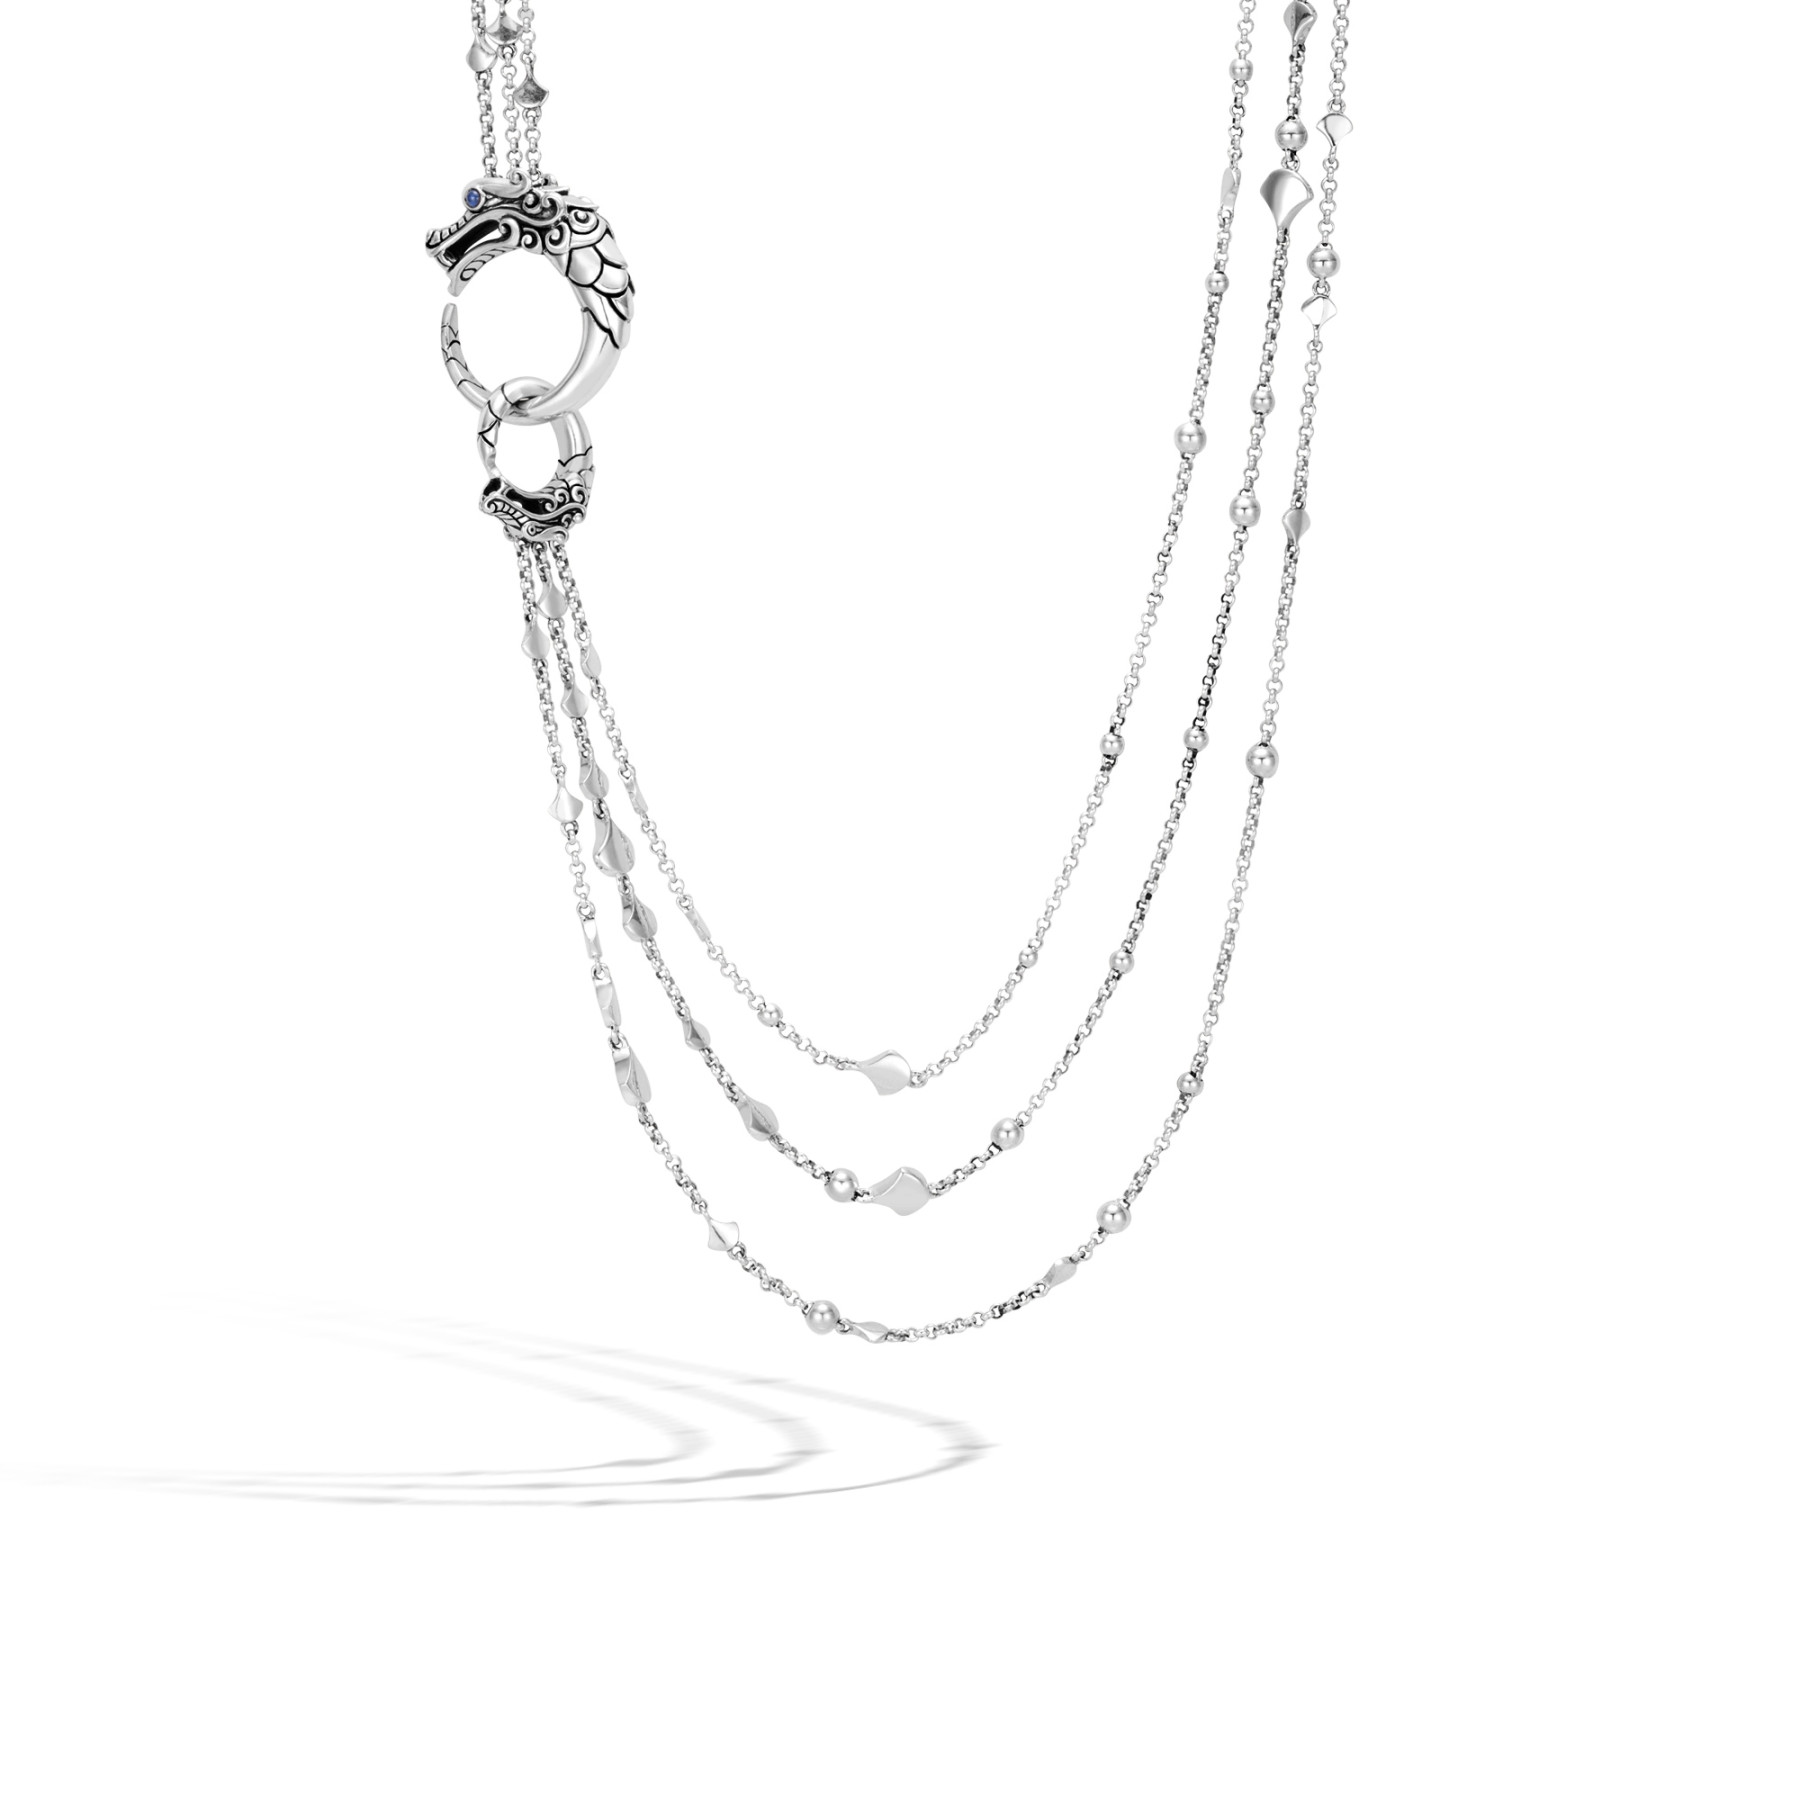 Download John Hardy Legends Naga Layered Necklace in Sterling SIlver